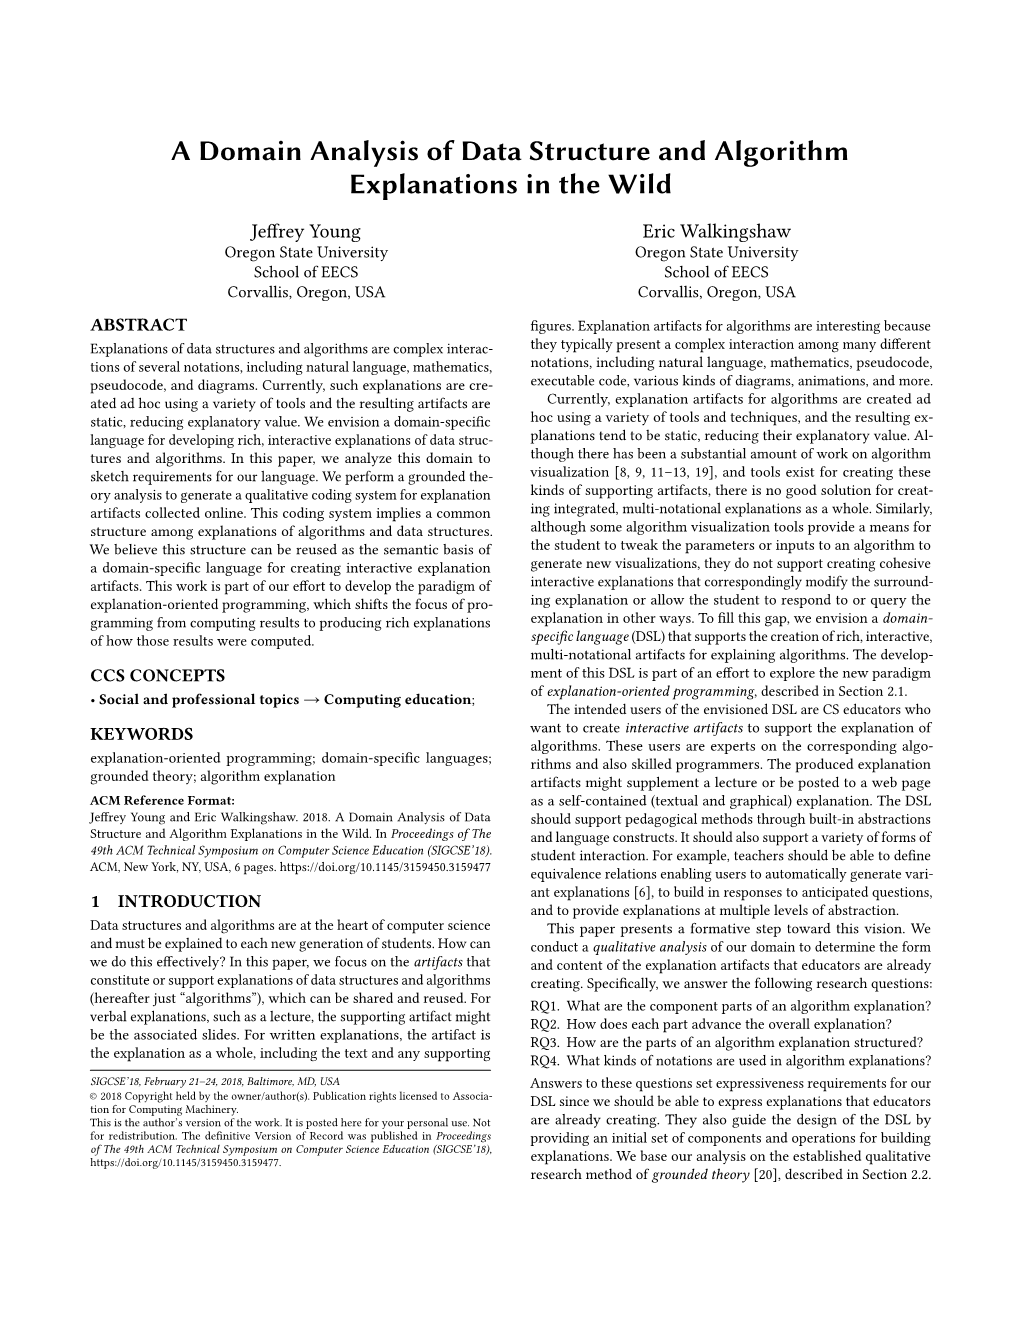 A Domain Analysis of Data Structure and Algorithm Explanations in the Wild